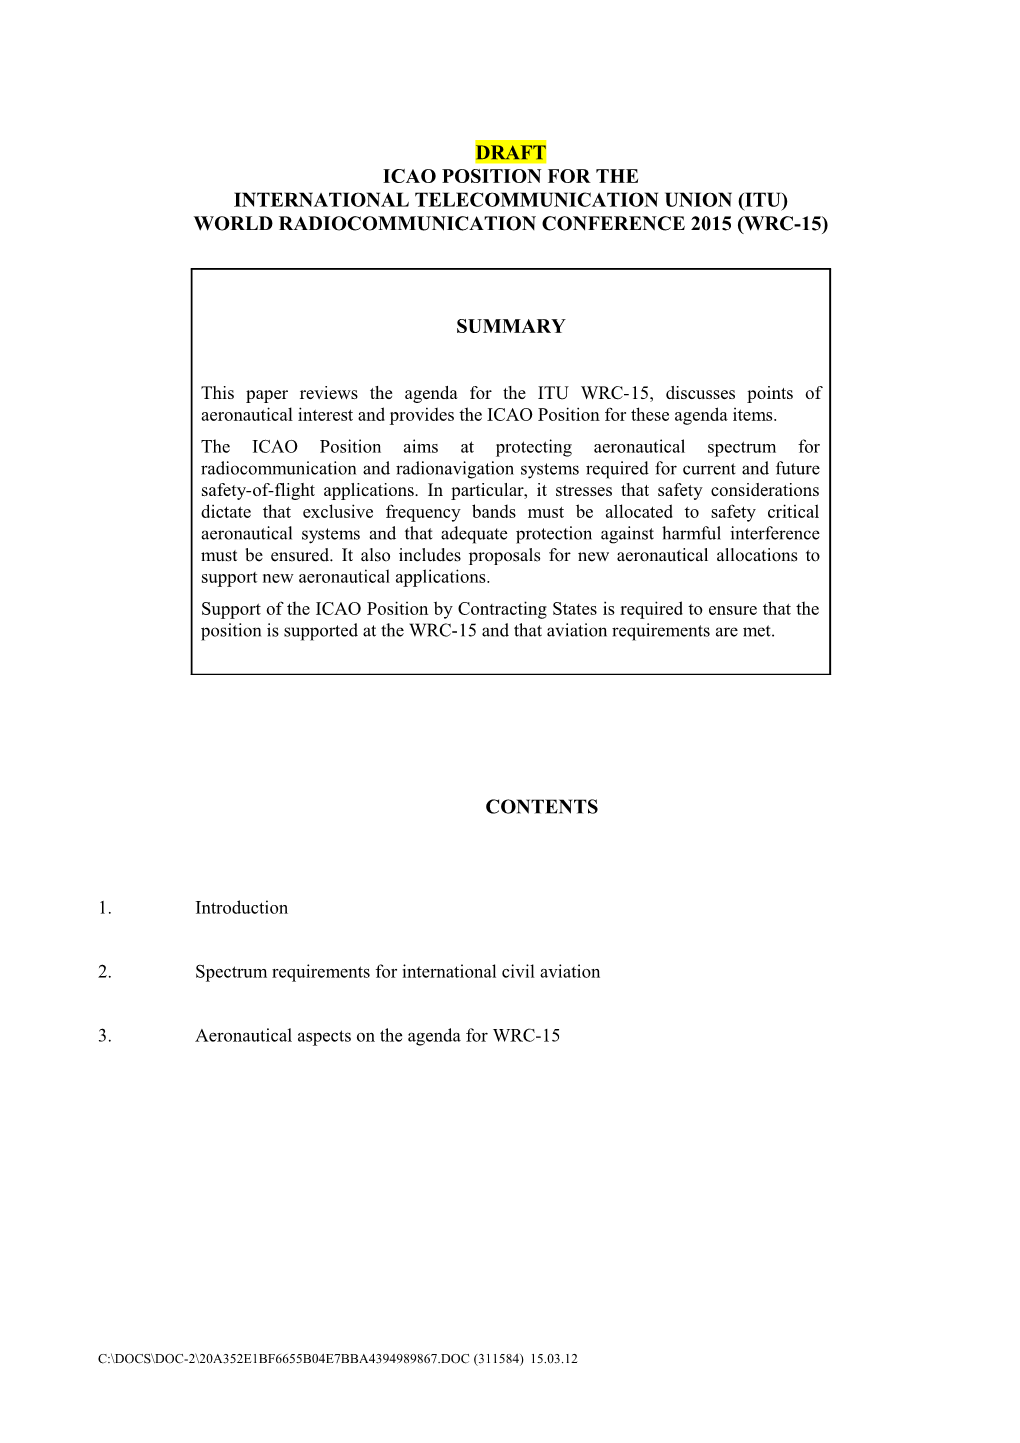 Appendix Proposal for the Draft ICAO Position for WRC-15